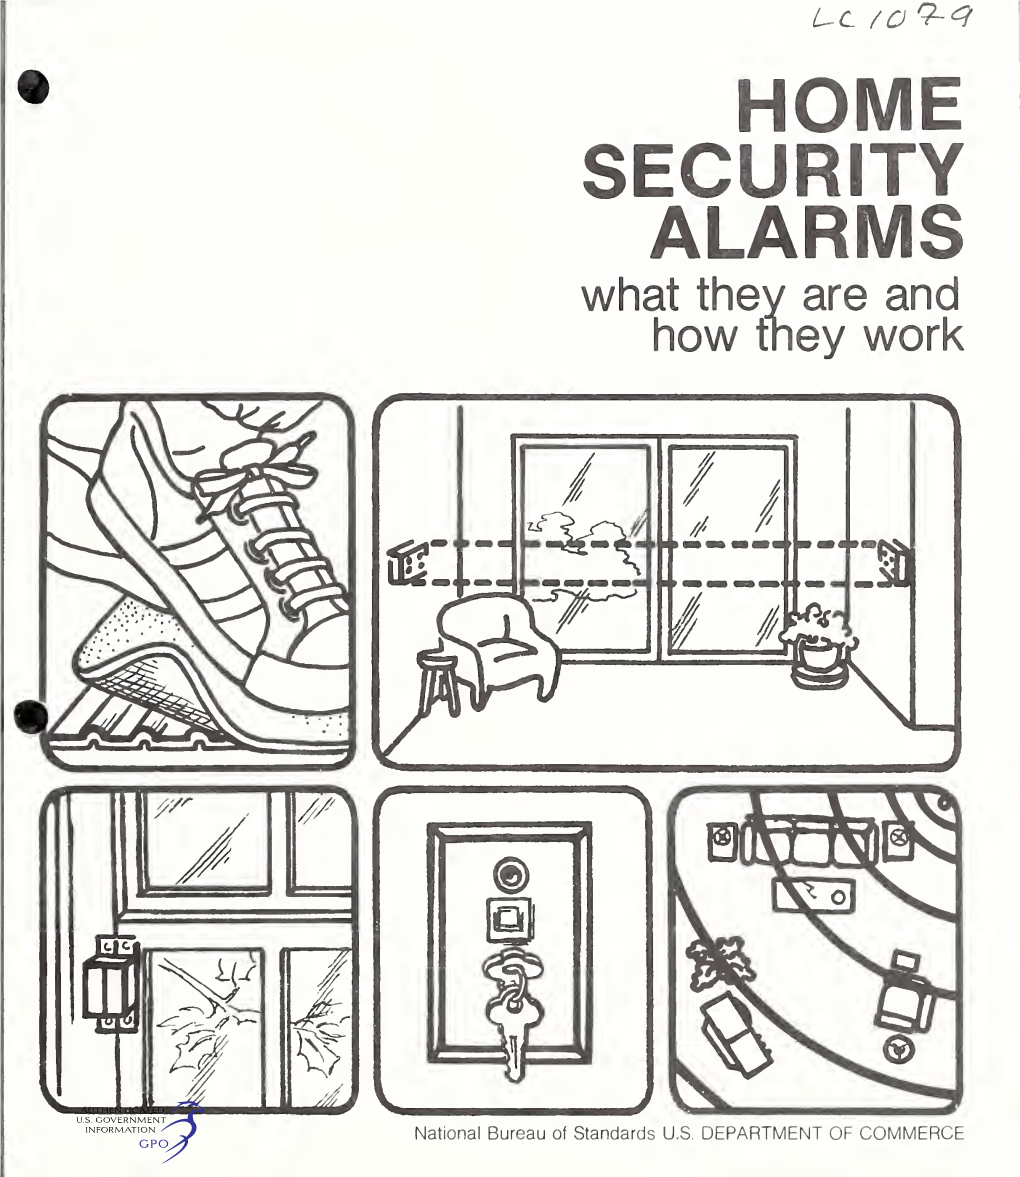 HOME SECURITY ALARMS What They Are and How They Work